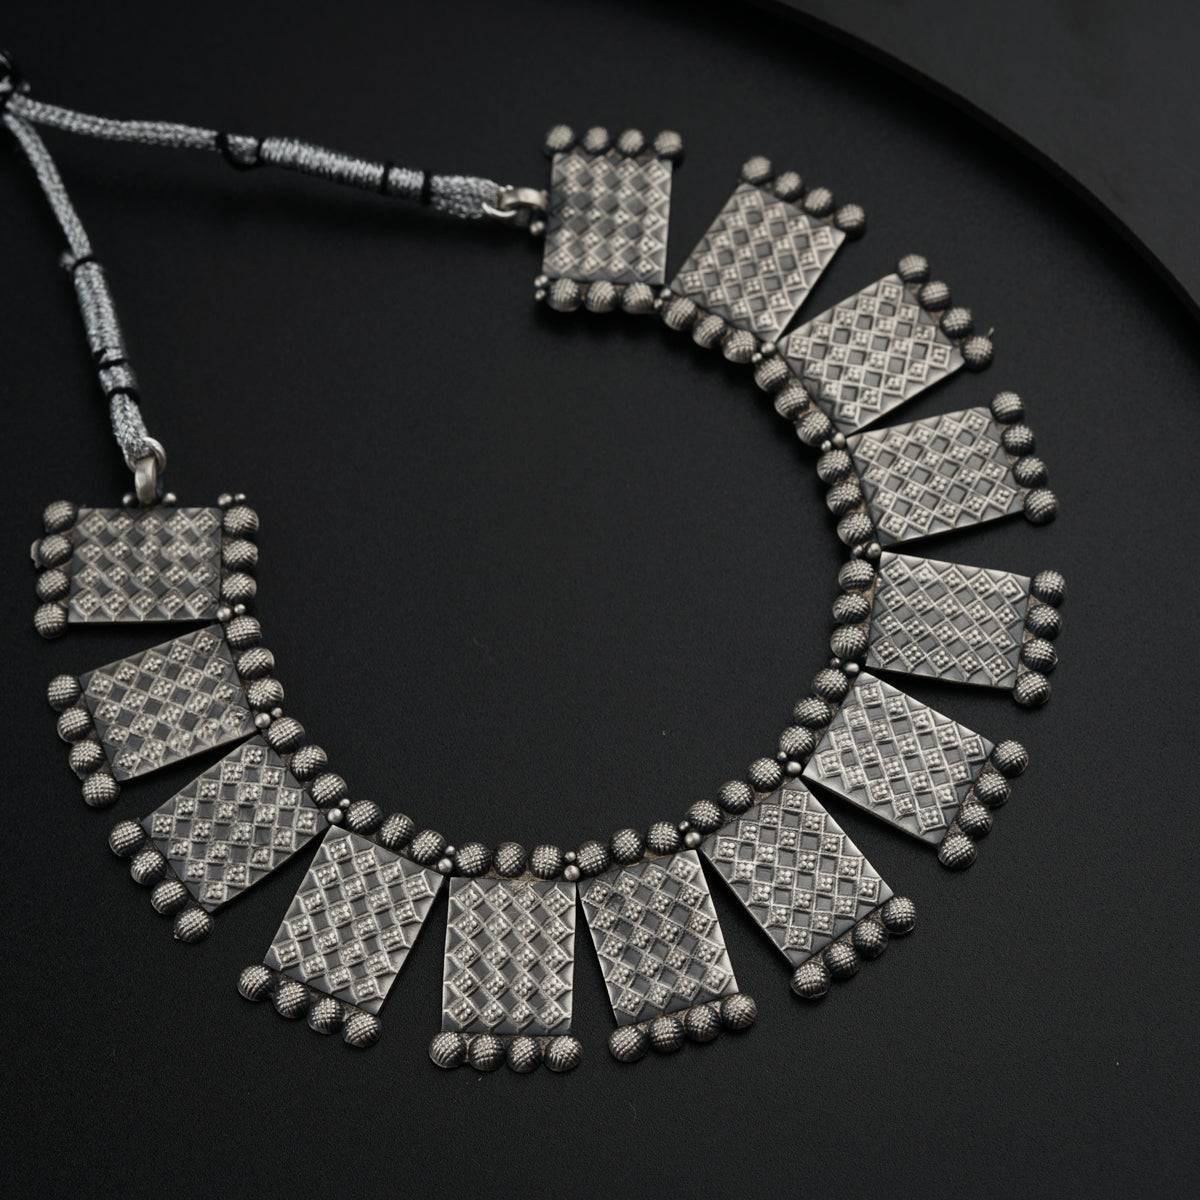 a necklace made of silver beads on a black surface